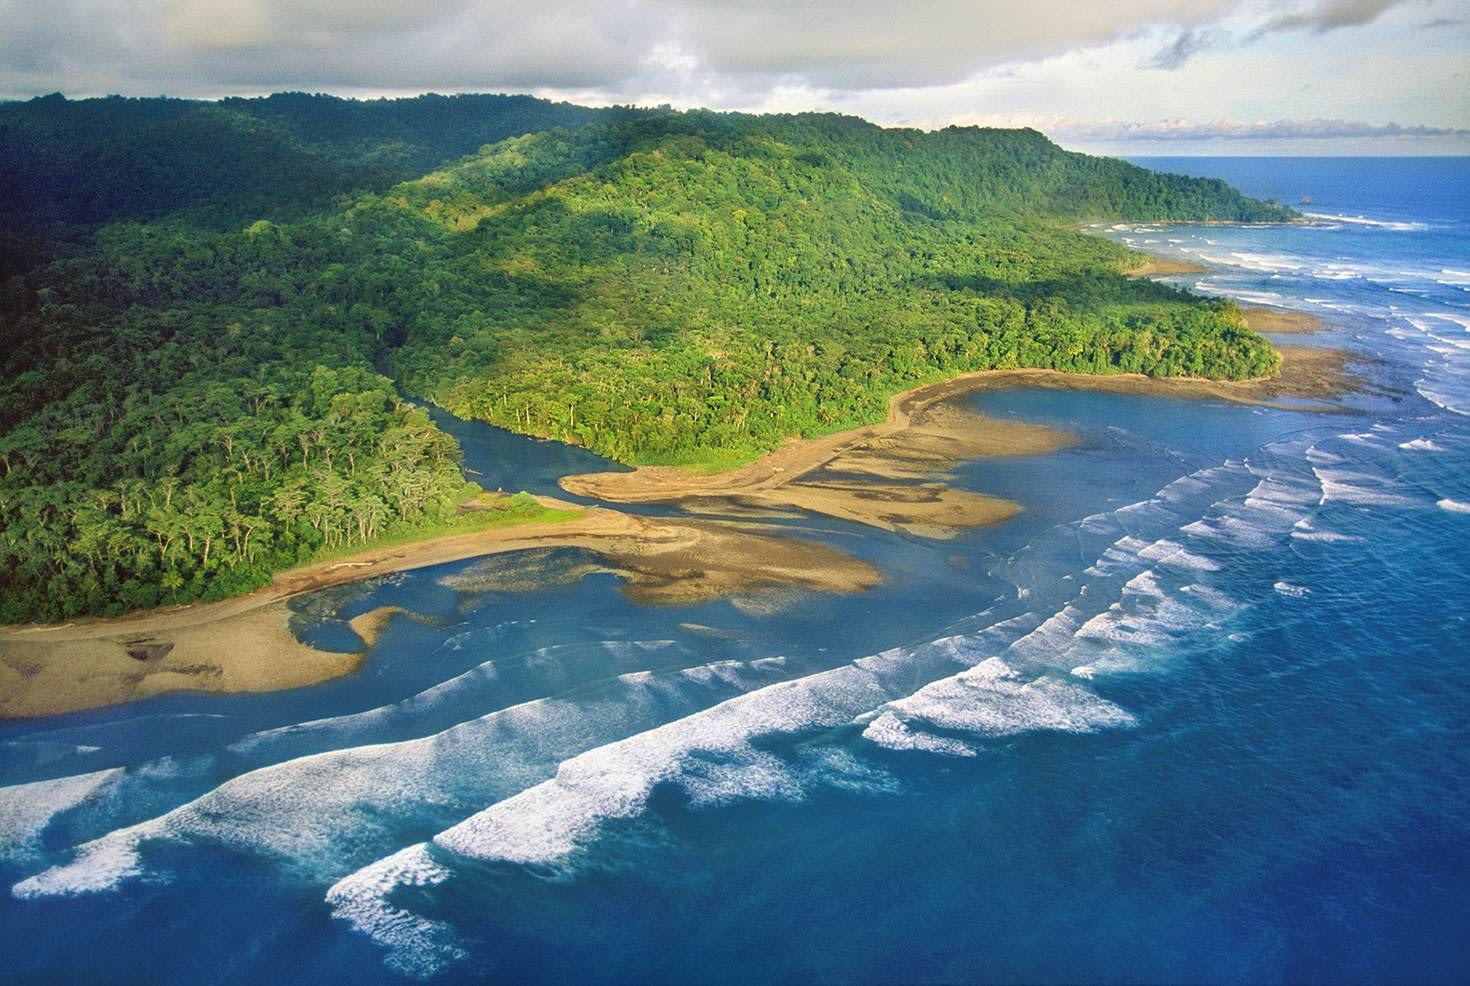 Positioning of Costa Rica as a Destination for Tourism Investment - Travel  Excellence